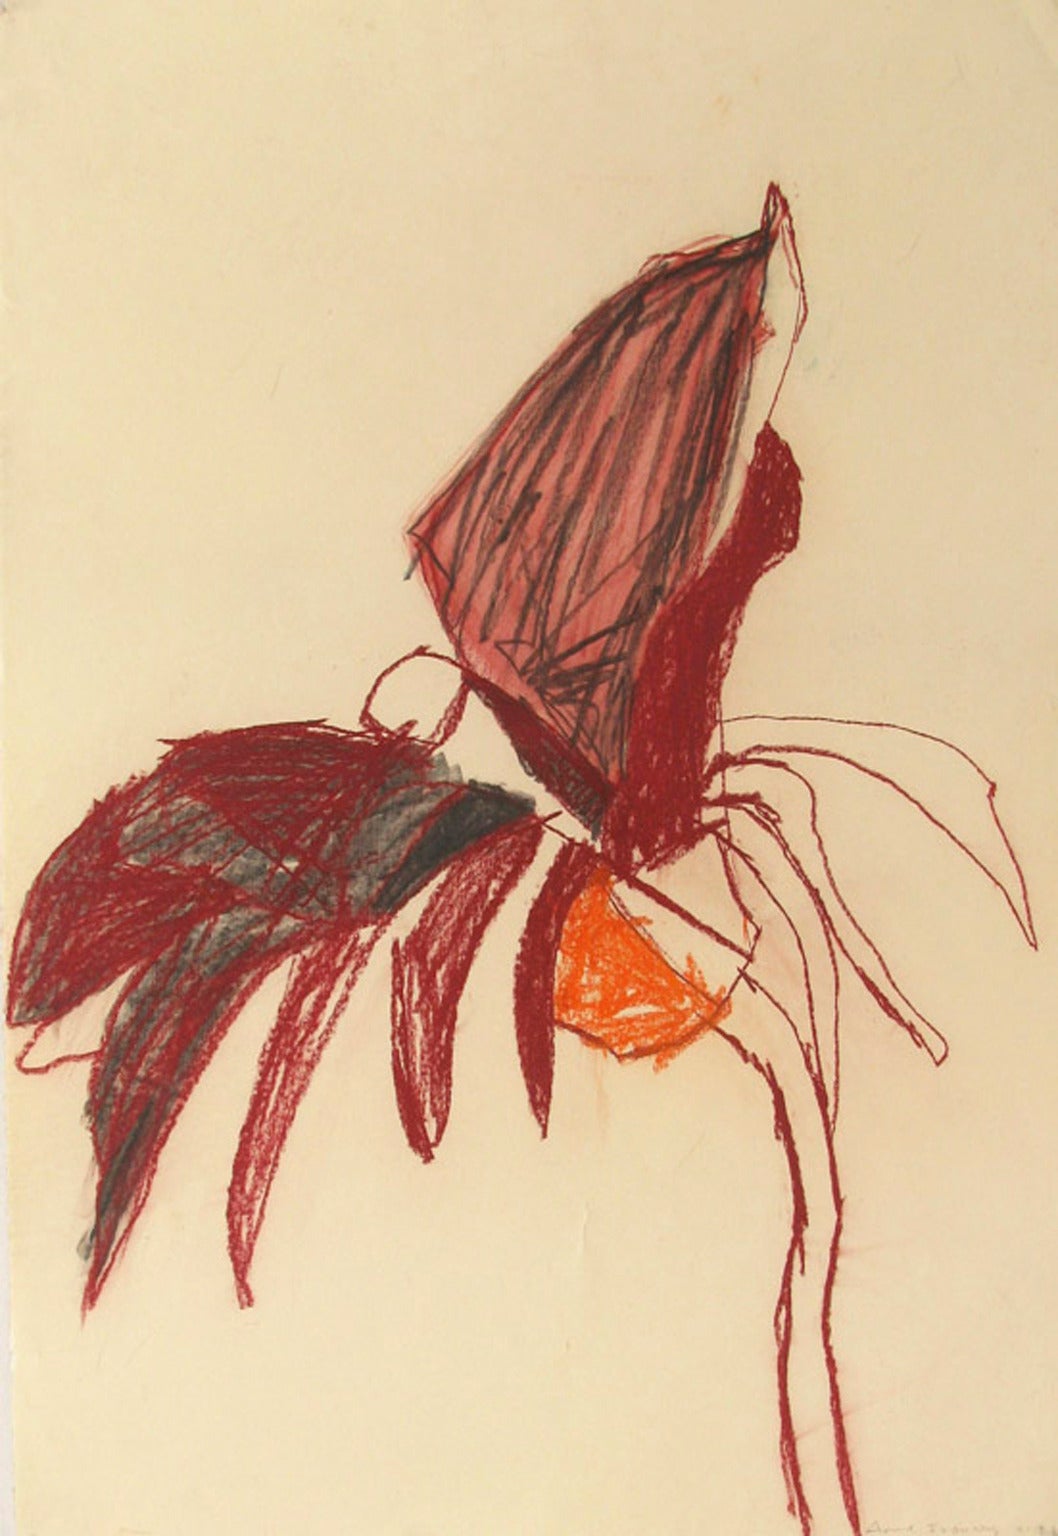 Flower #3 (Gestural Abstracted Flower Drawing in Red and Orange on Paper)